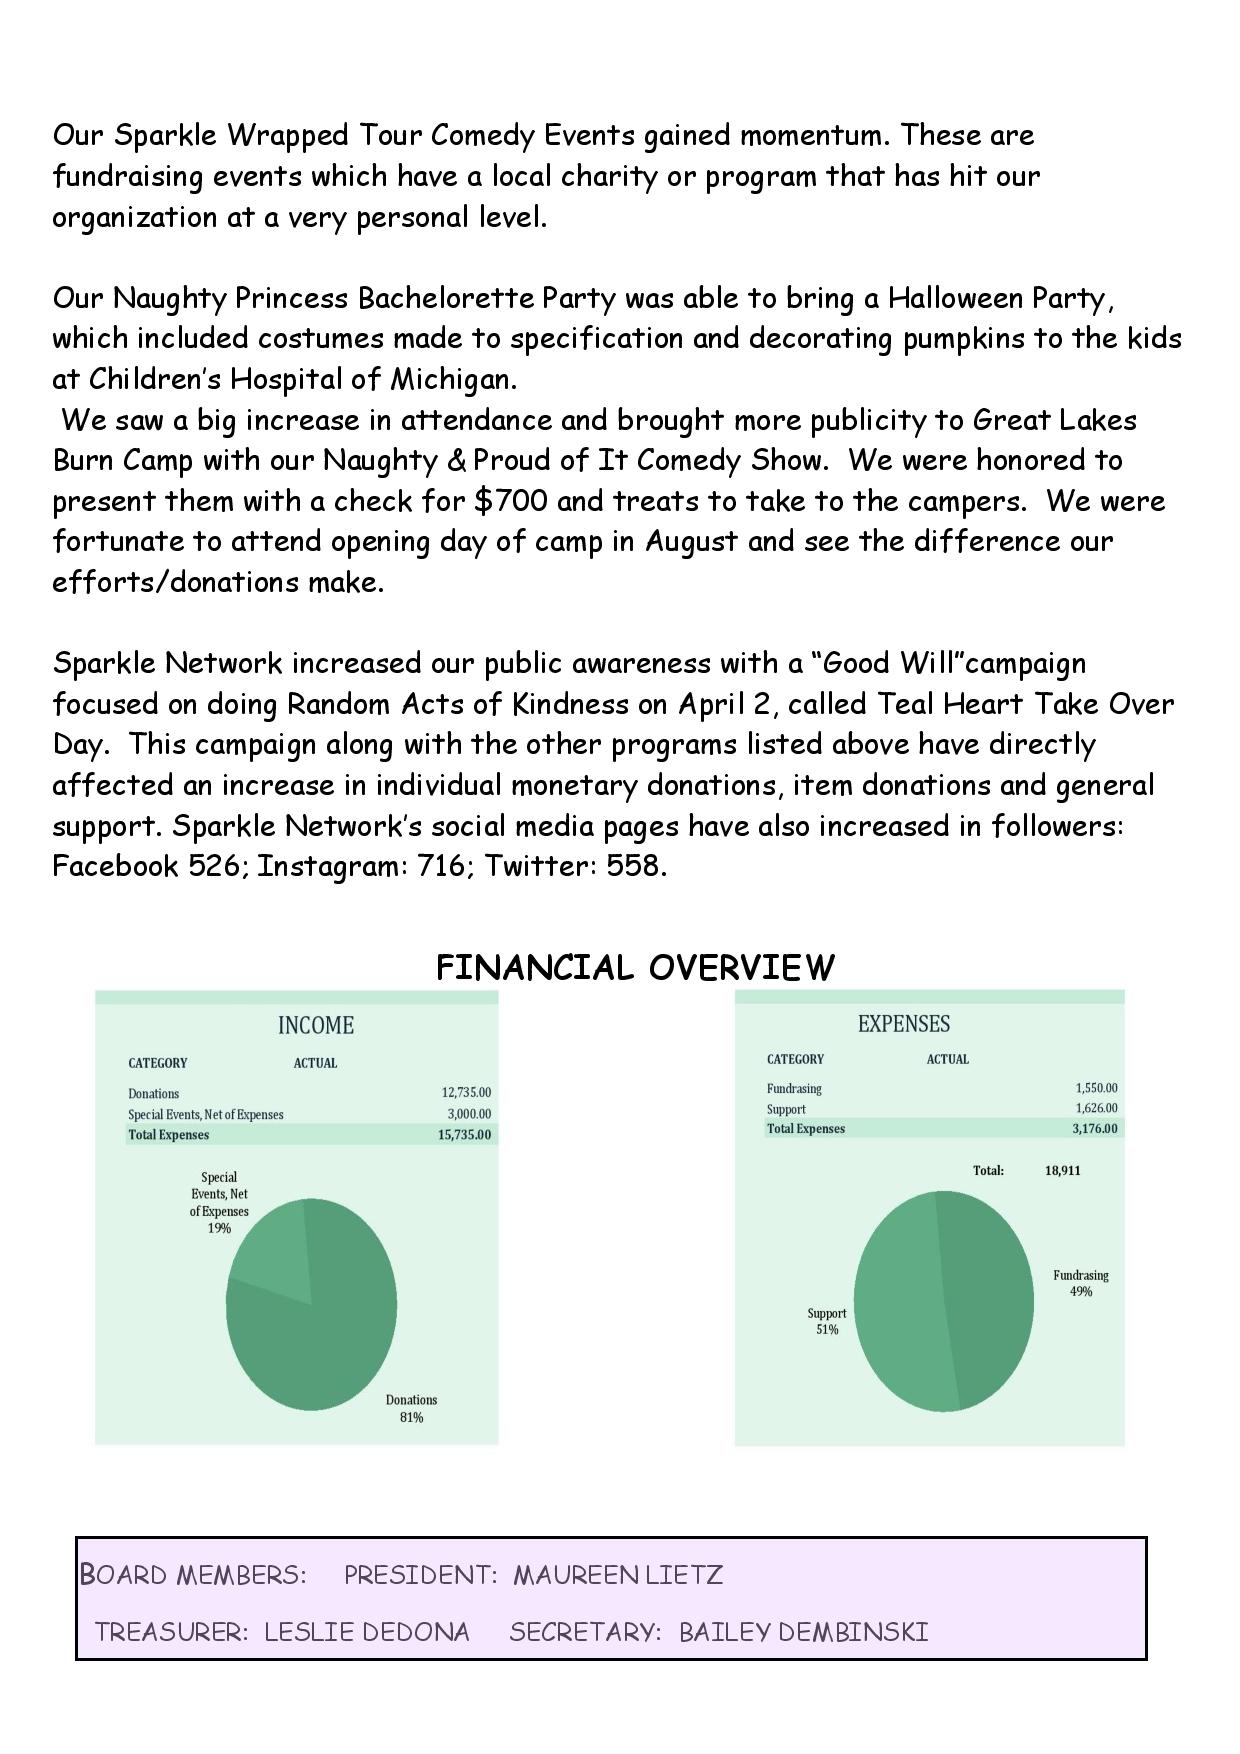 2015-sparkle-network-annual-report-page-002